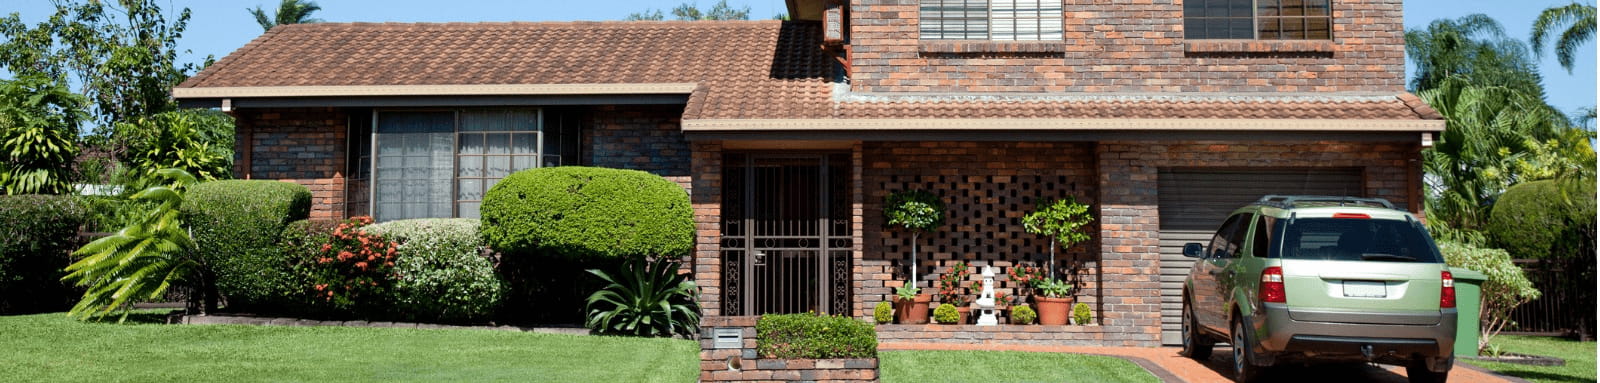 Brown brick double story suburban home